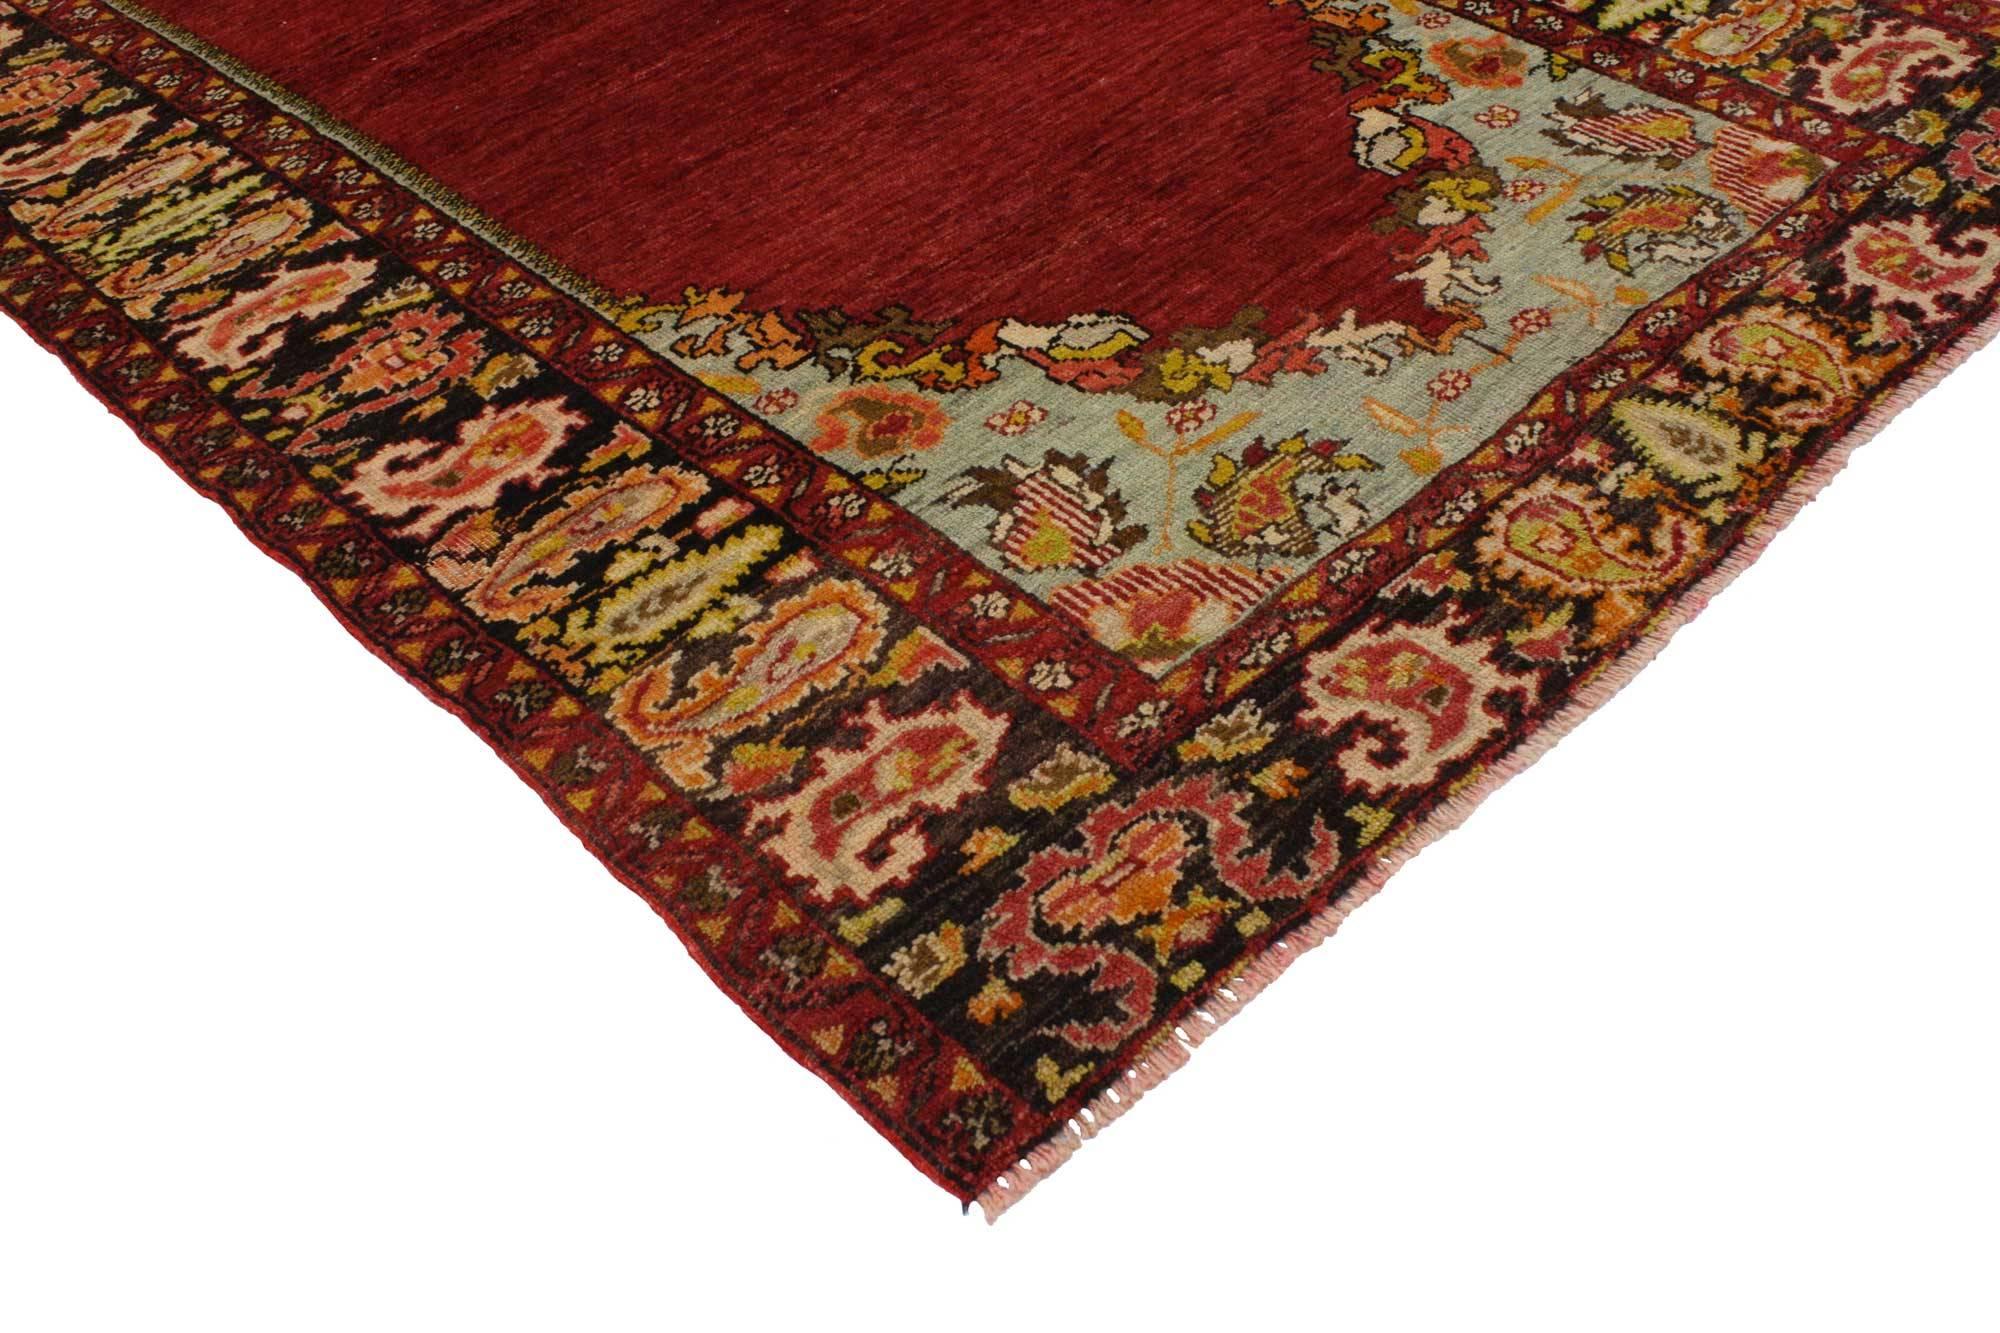 51656 Jacobean style vintage style Oushak rug, entry or foyer rug. A cloud-band border composed of pistachio color cypress trees and jagged edge boteh motifs surround an abrashed field of striated ruby red and crimson in this impressive Oushak